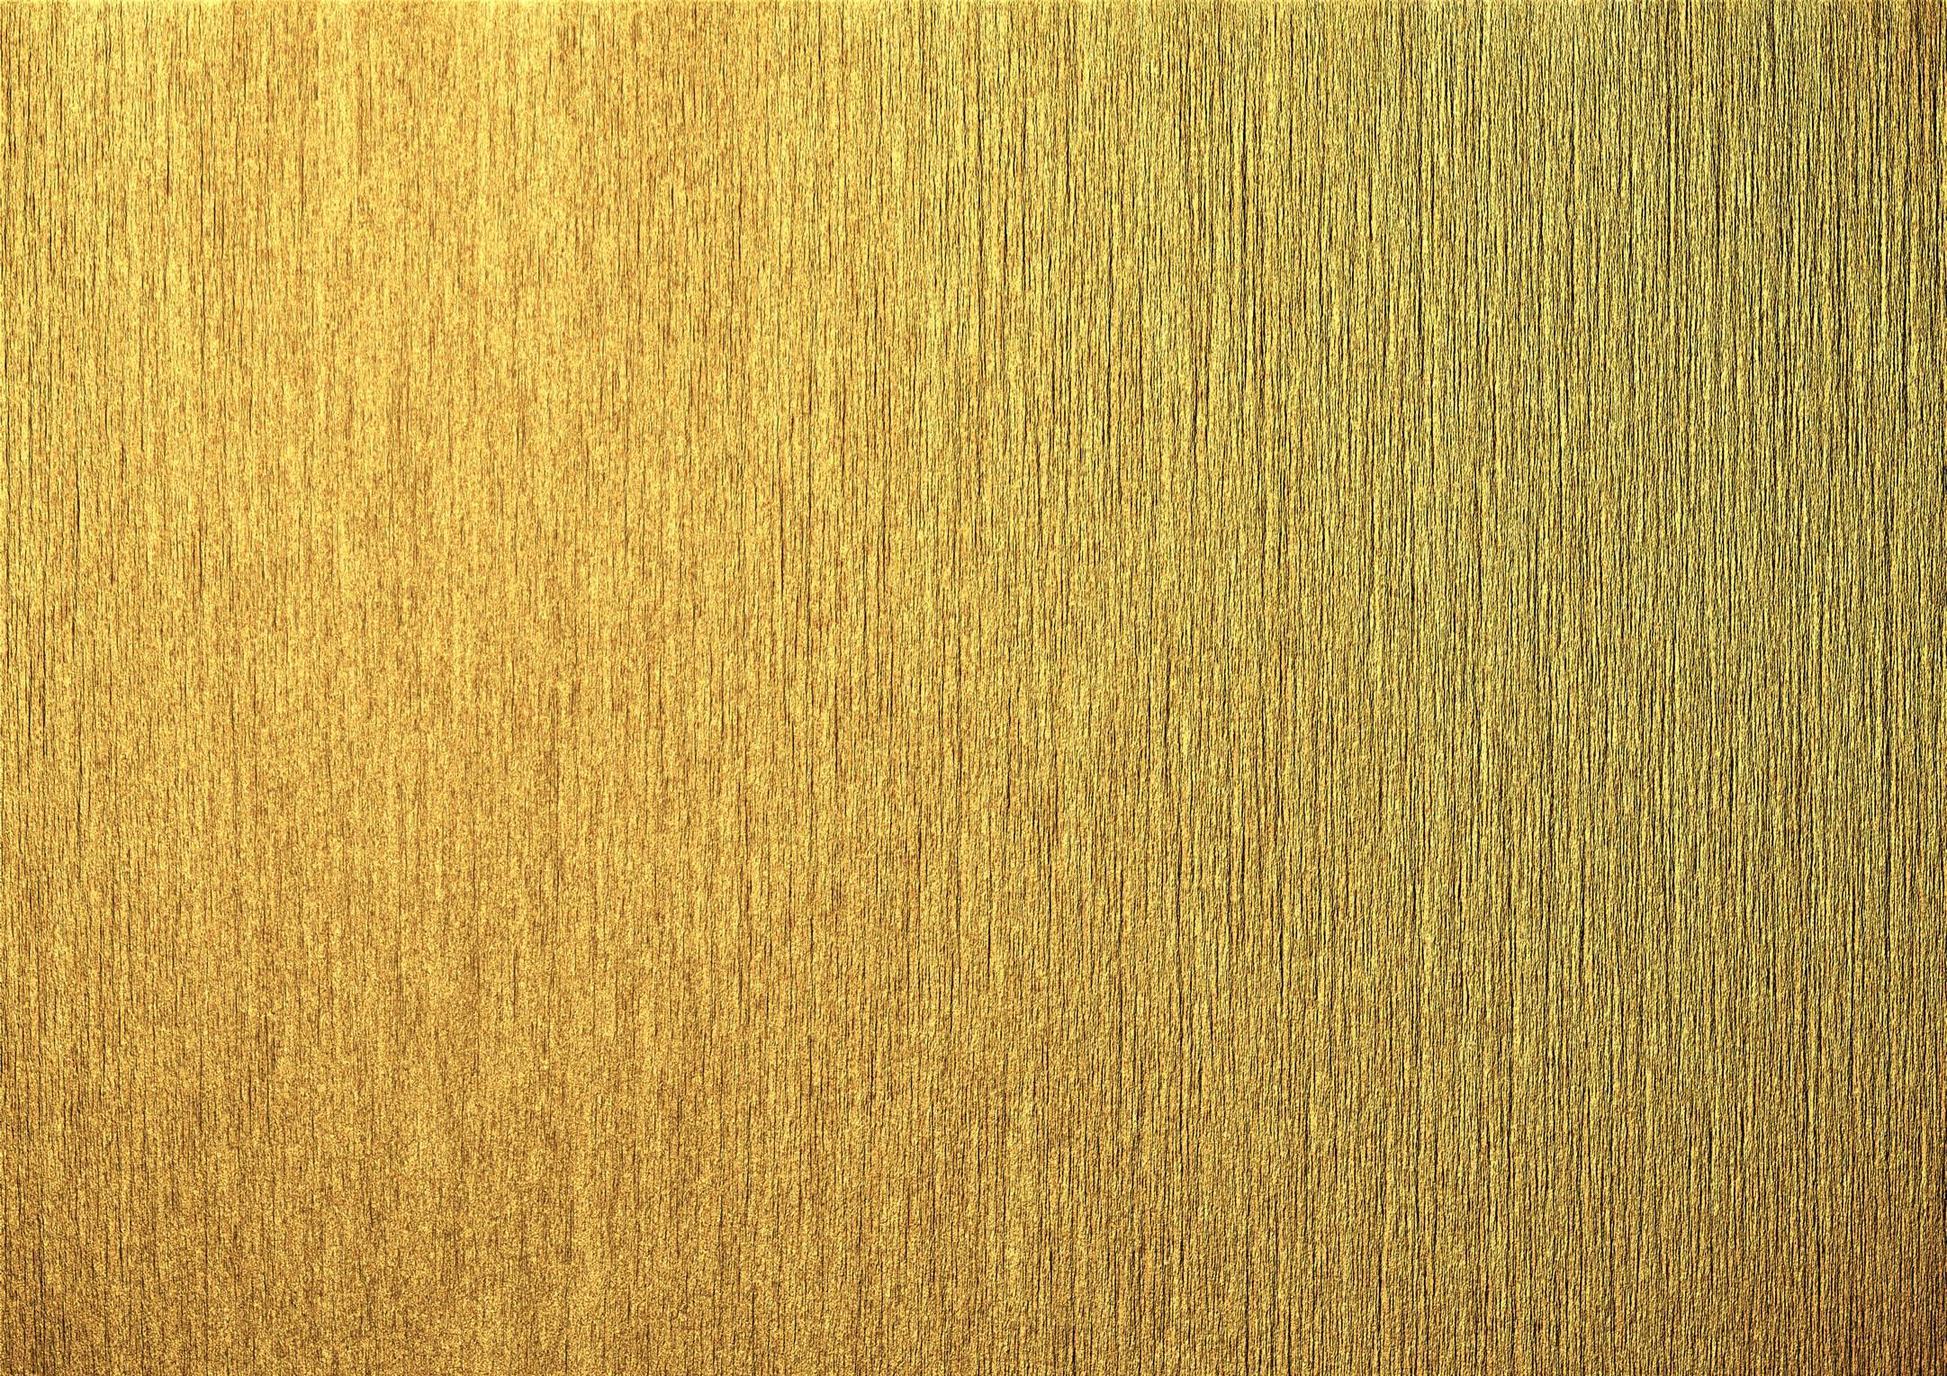 Gold Backgrounds Gallery